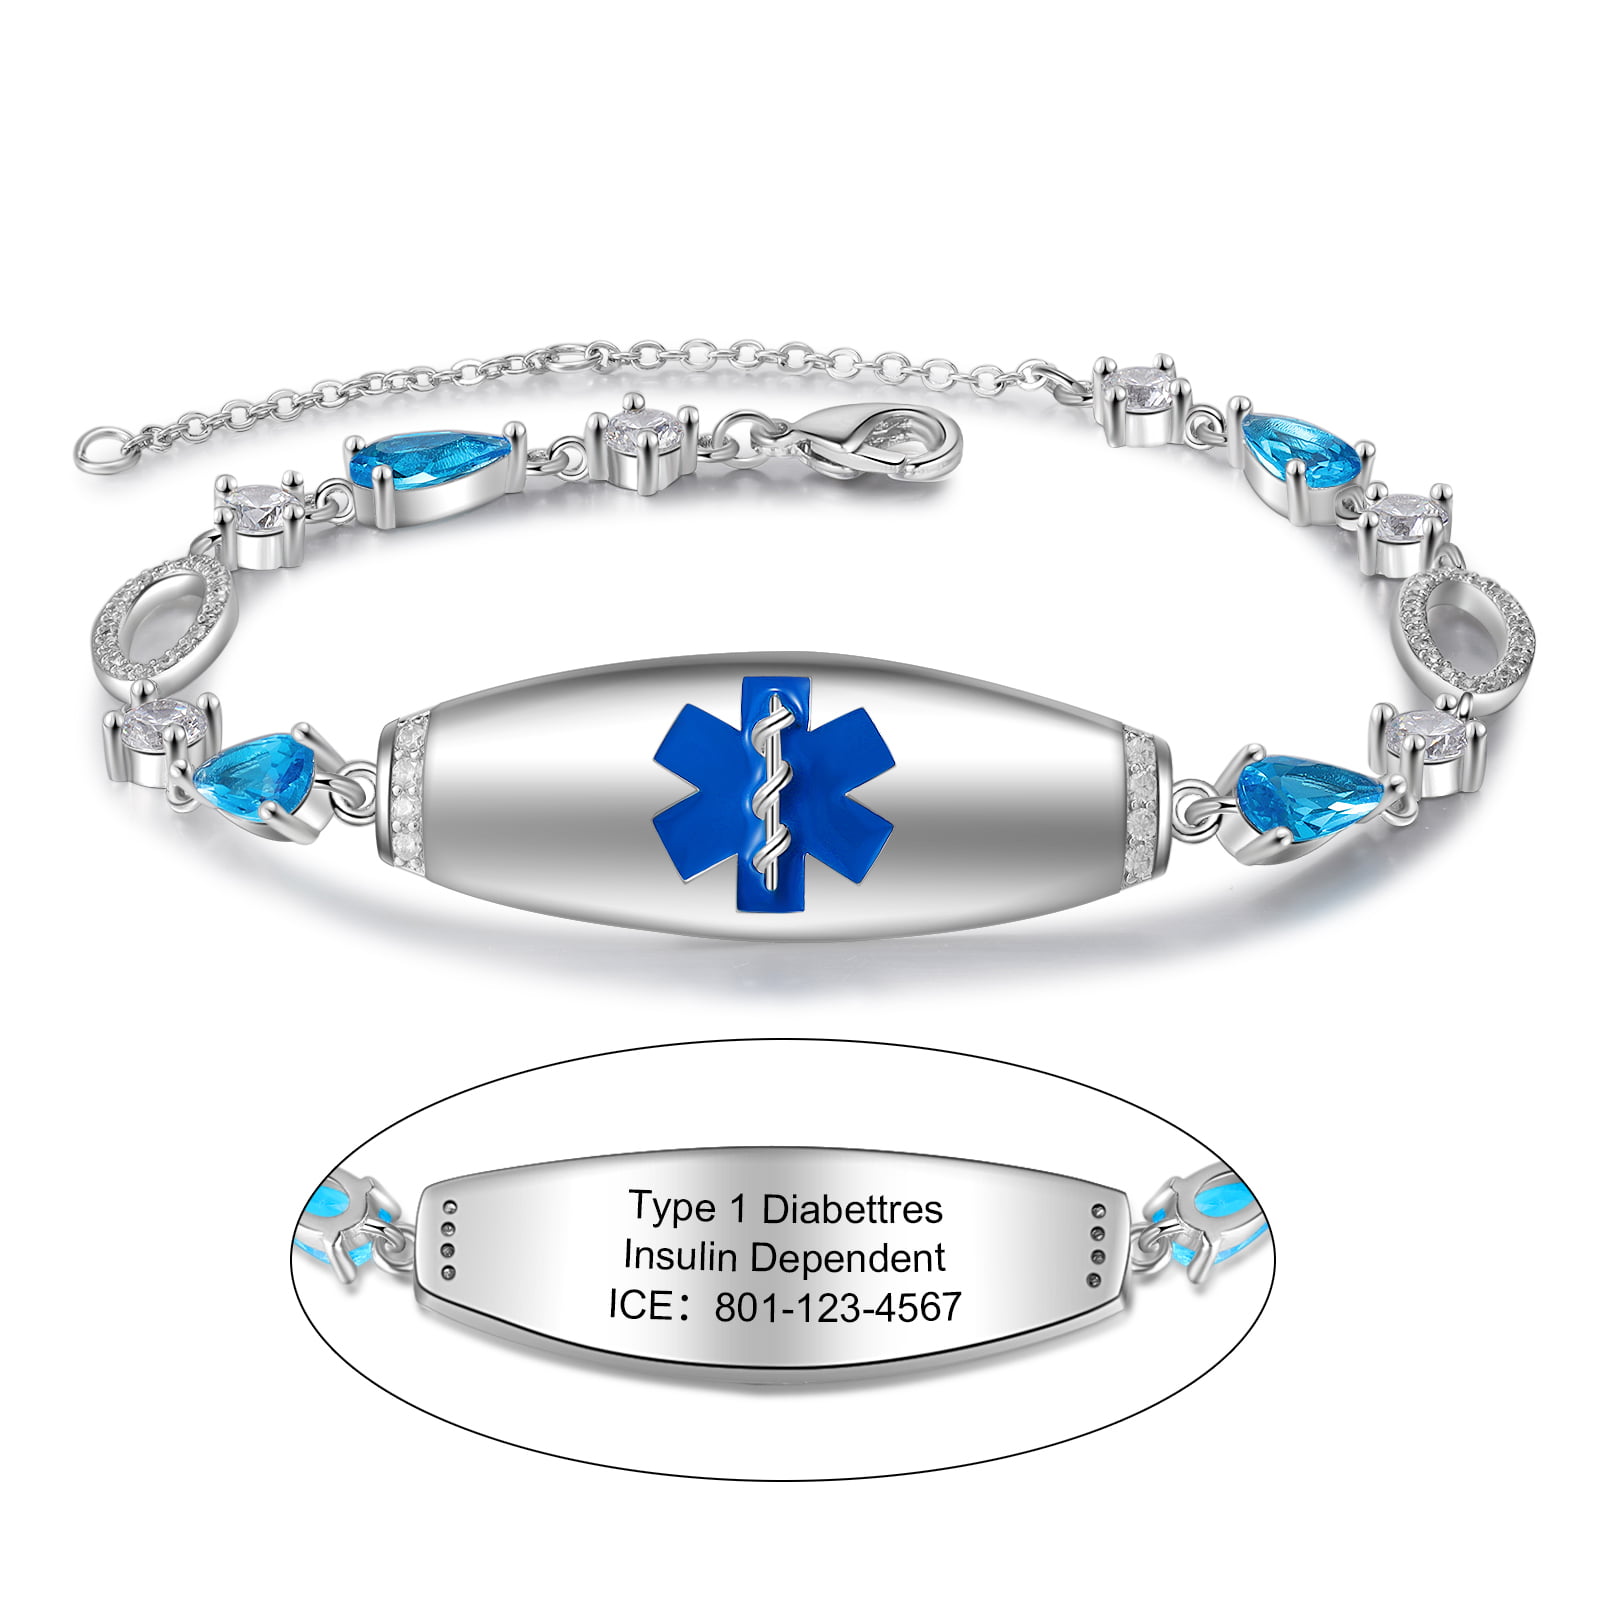 MEALGUET 1-5 Pcs Medical Alert ID Bracelet Engraved with Just Throw Me in The Trash with Medical Symbol ID Chain Bracelet for Men Women 